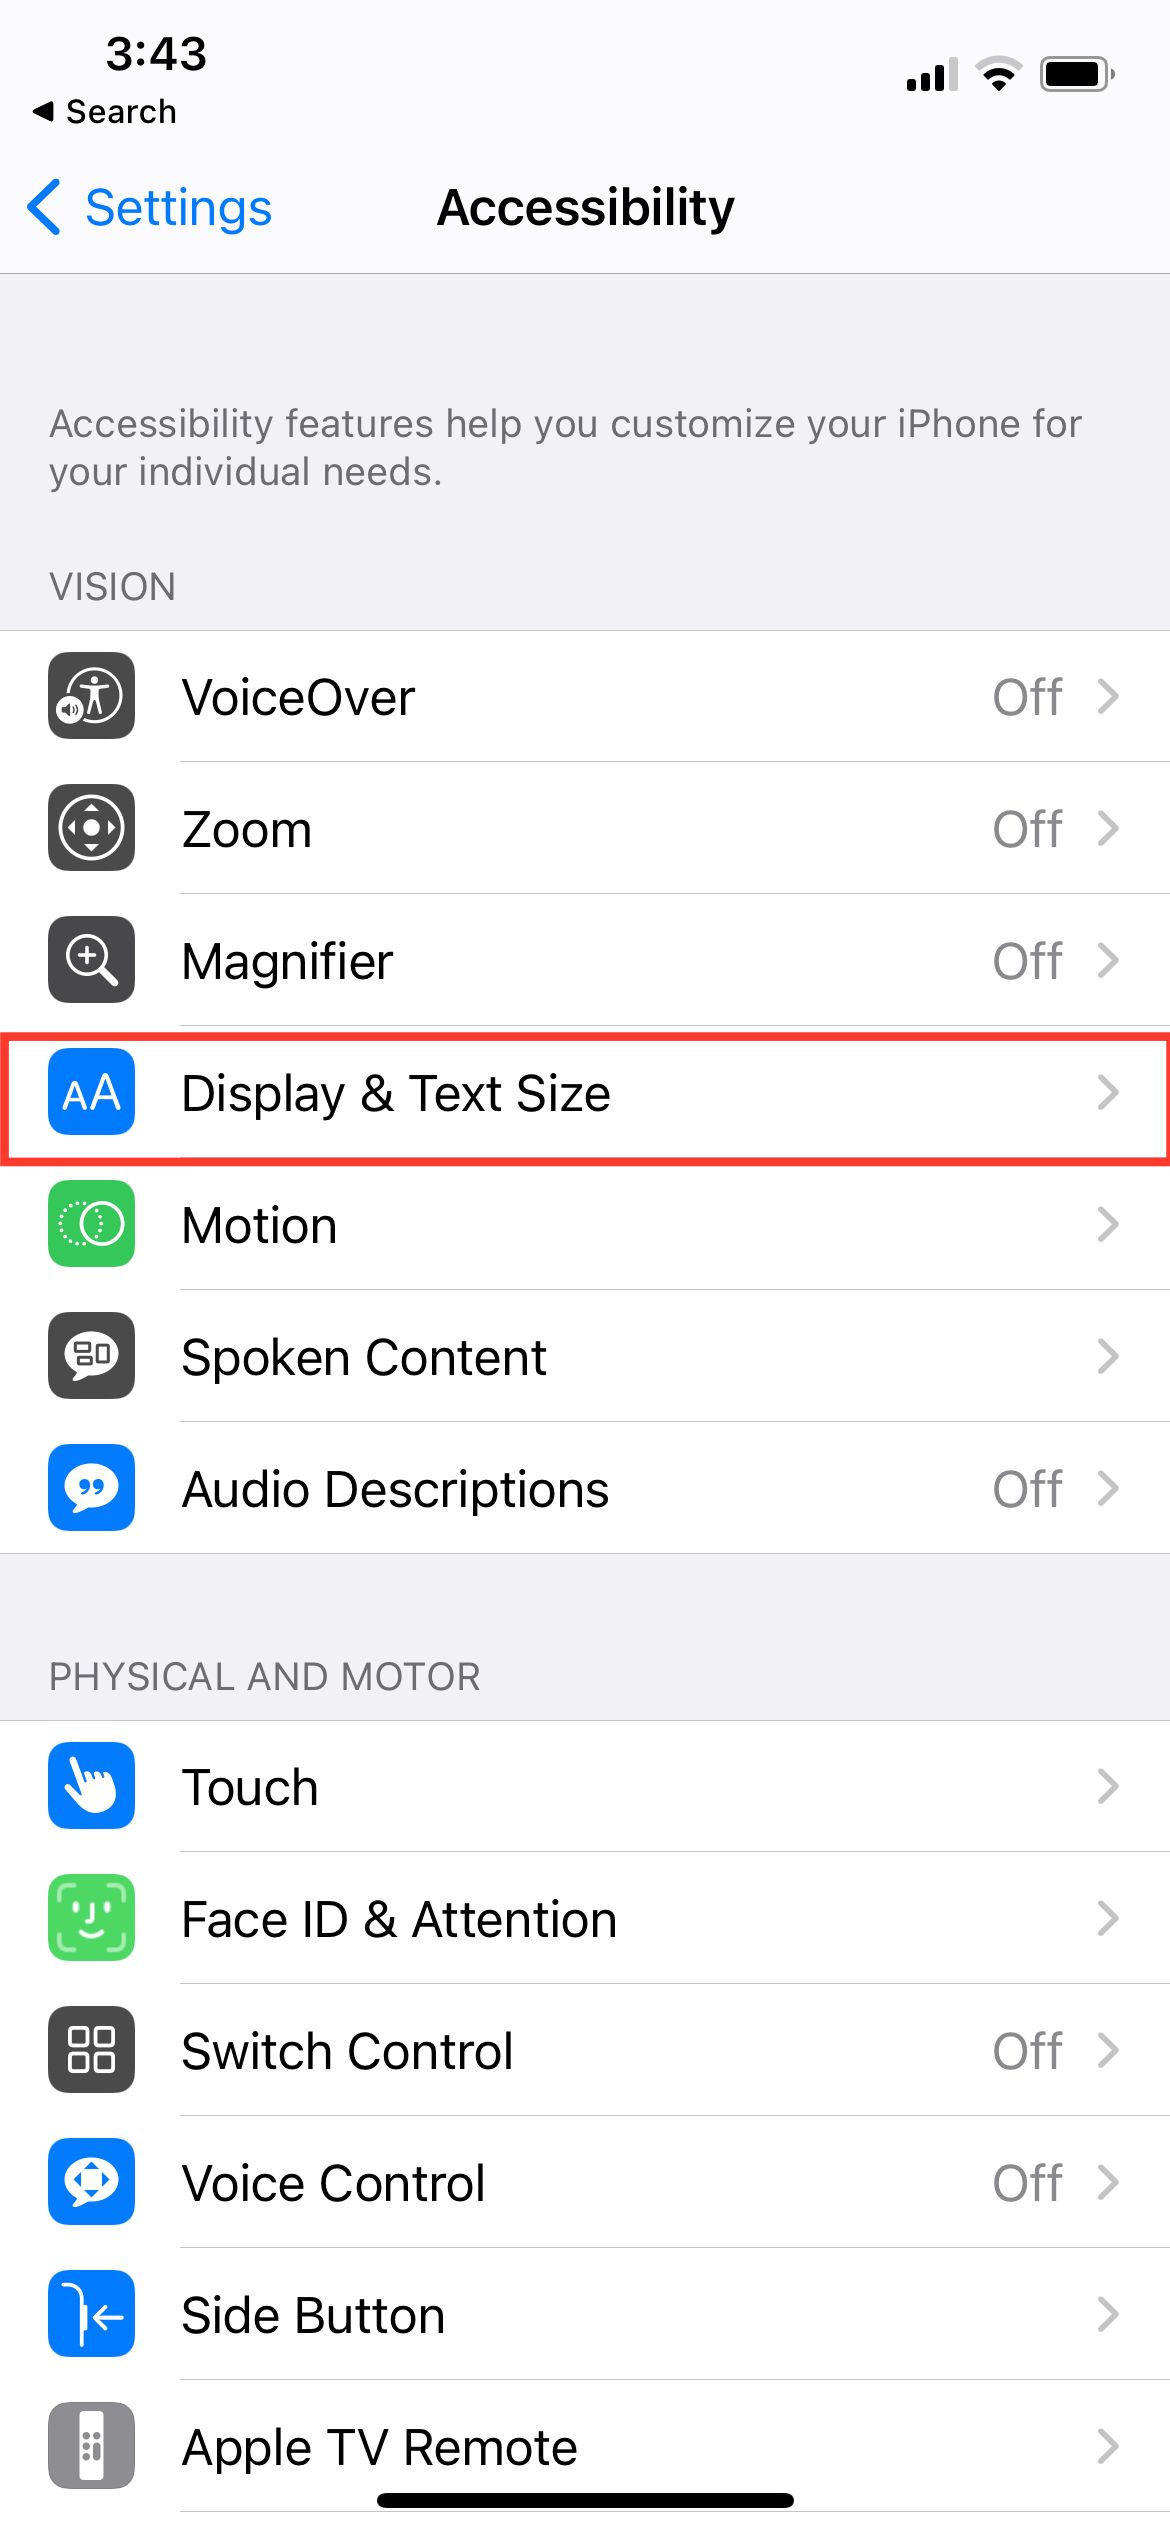 iPhone Display & Text Size settings.